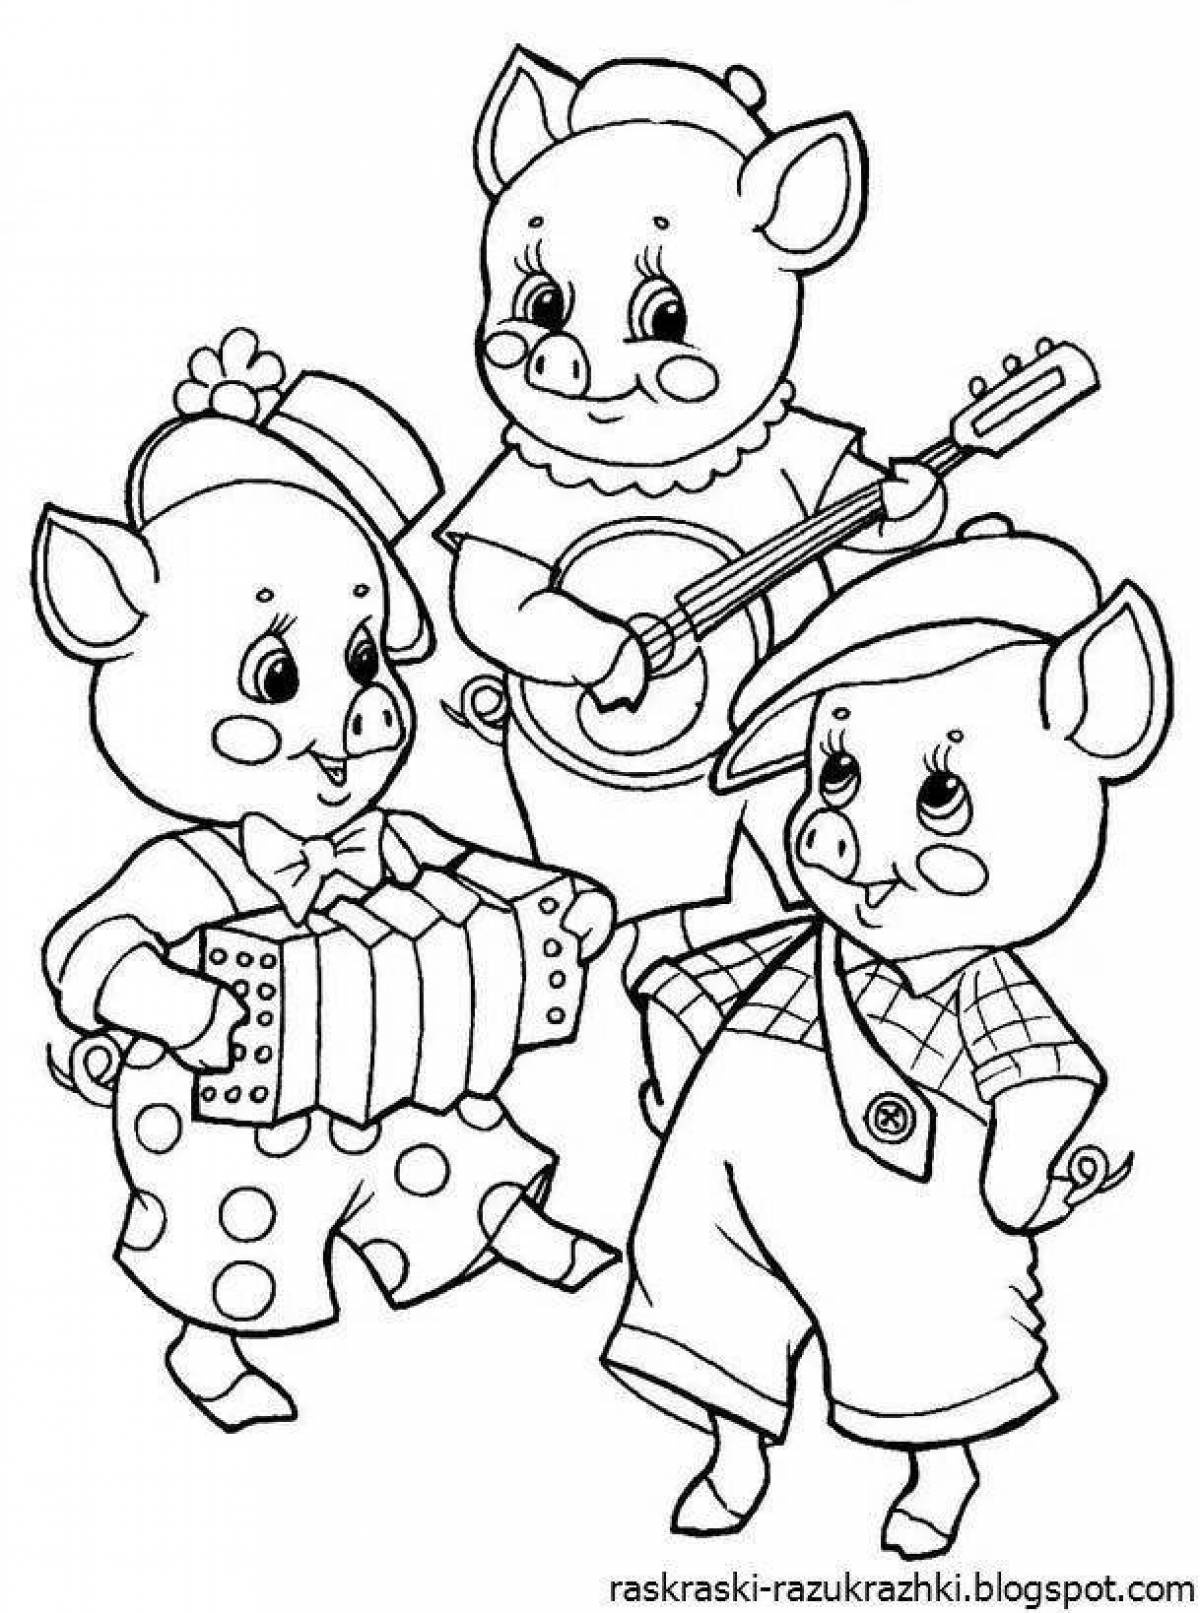 Three little pigs for children 4 5 years old #8